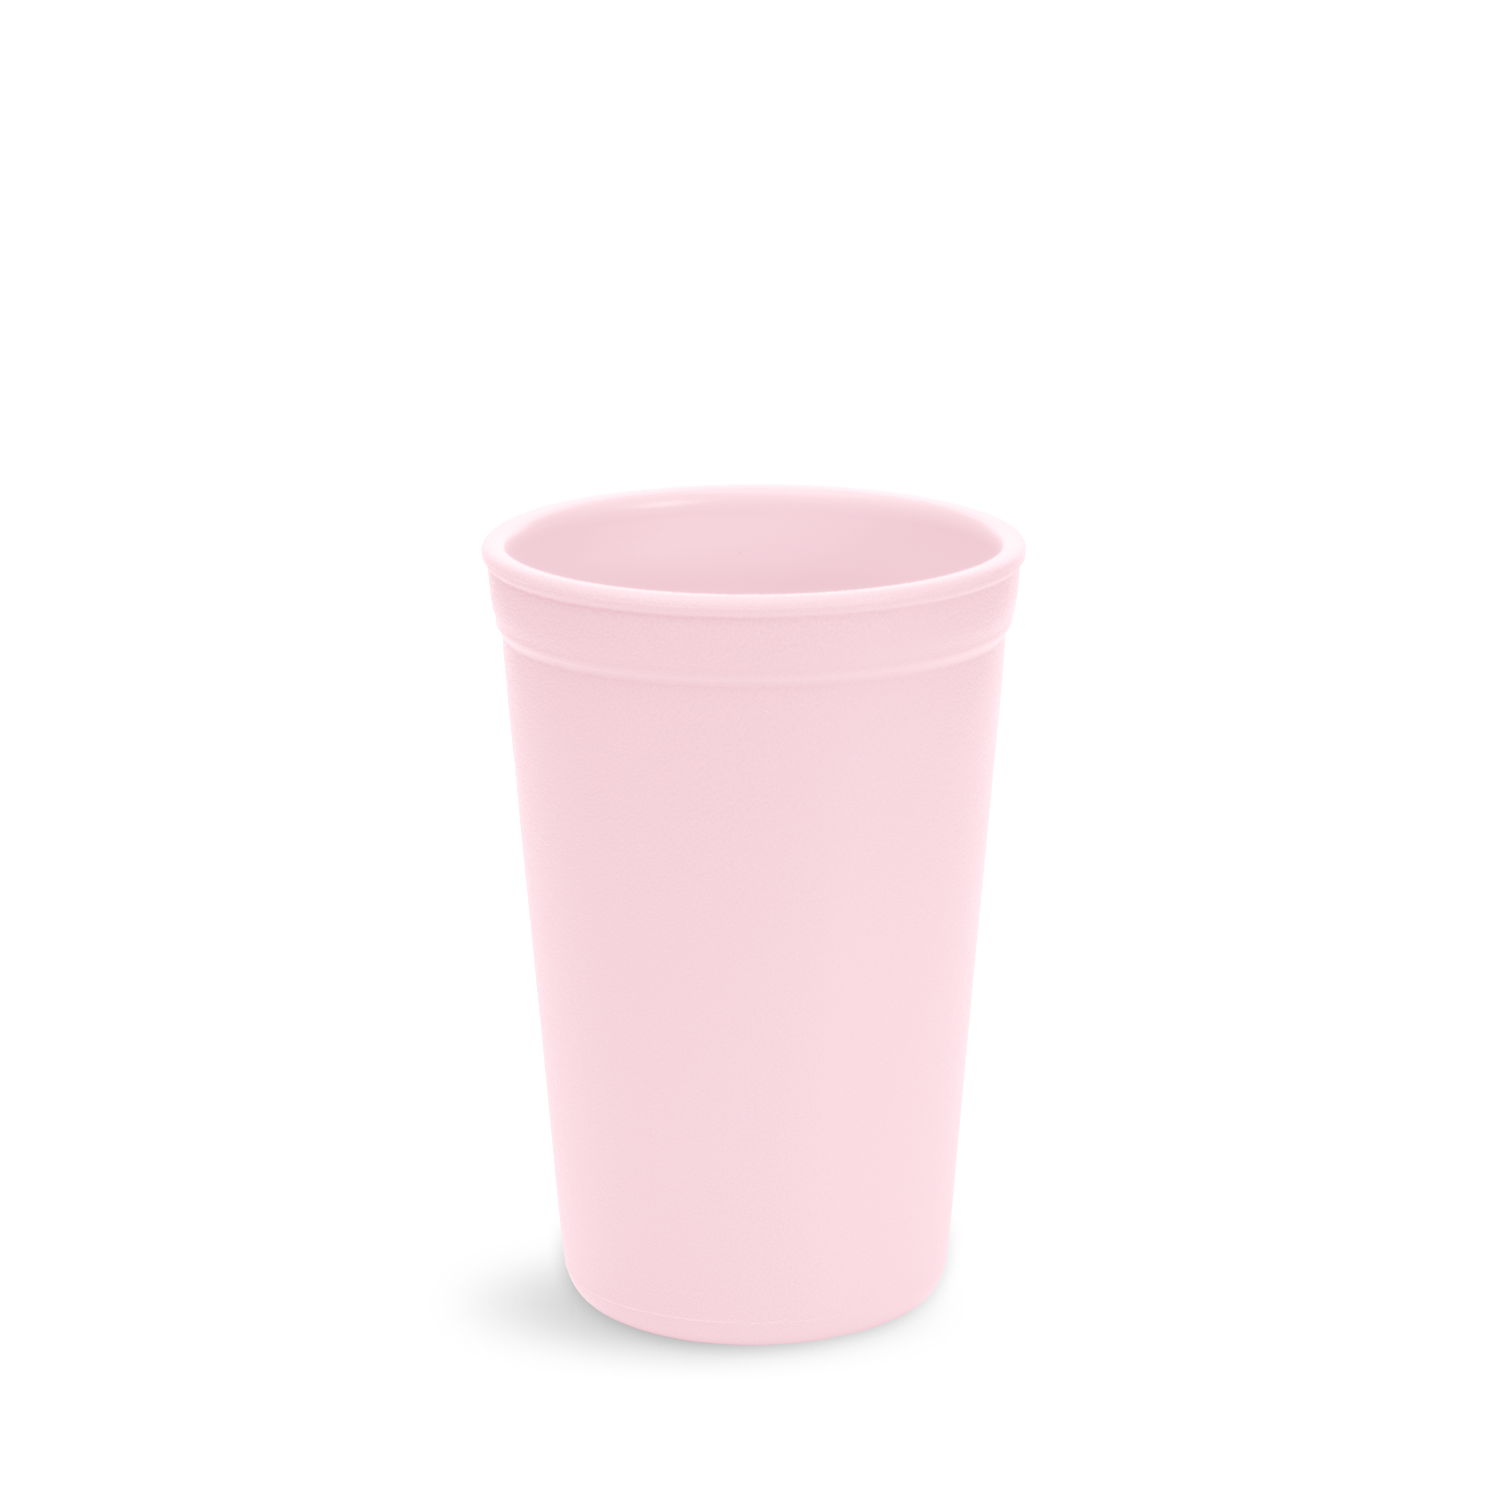 Cribmates 10oz Spill Proof Cups 2-Pack, Pink Flowers